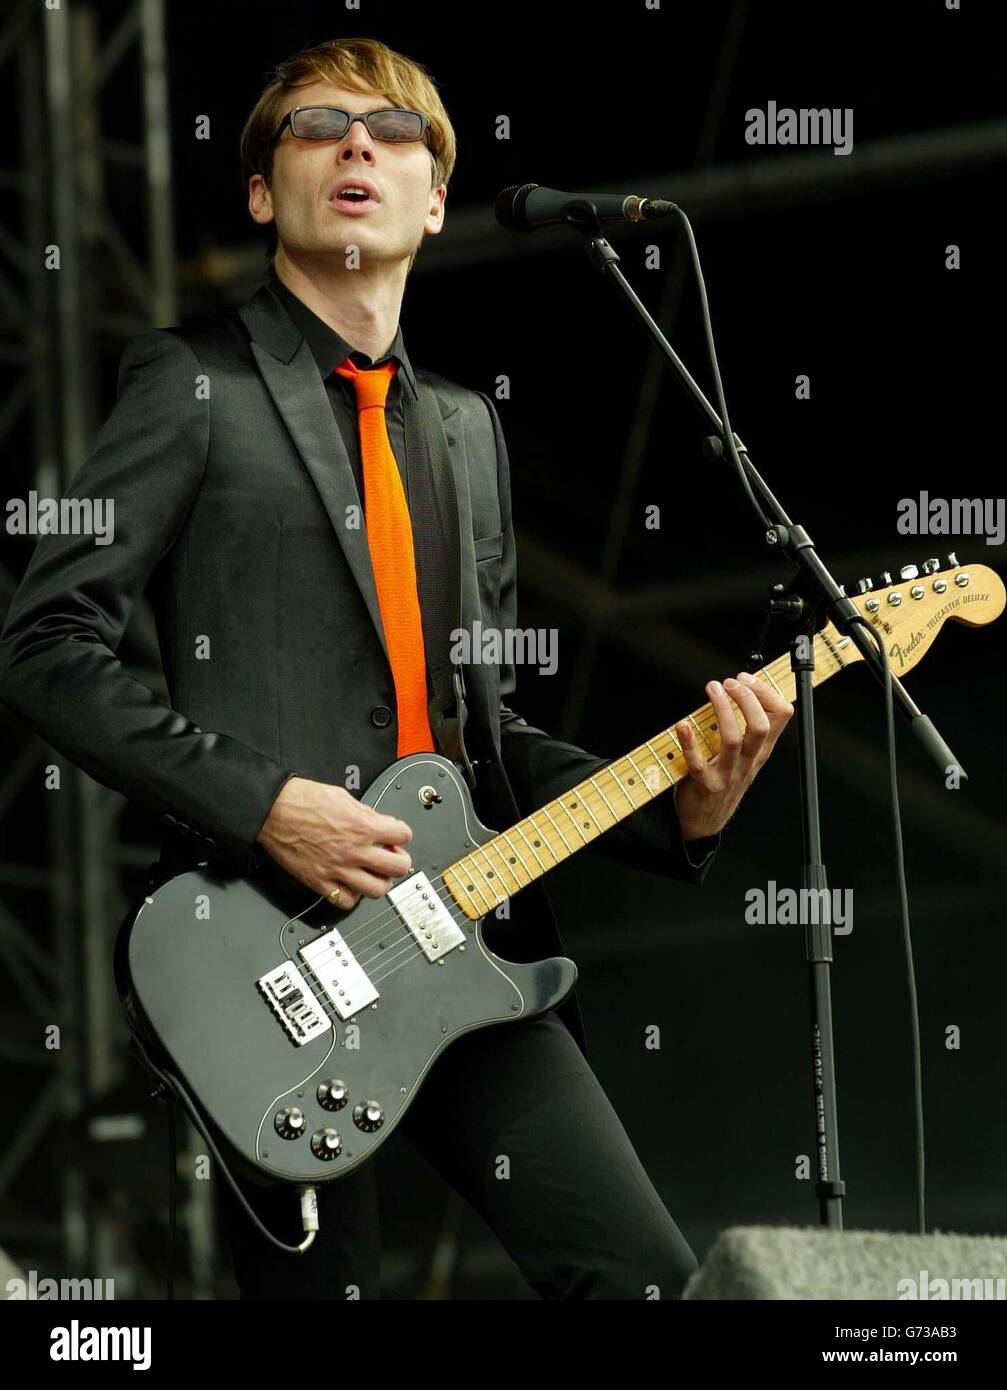 Alex Kapranos lead singer of Franz Ferdinand on the main stage during the second day of T in the Park, the two-day music festival event in Balado near Stirling. Stock Photo